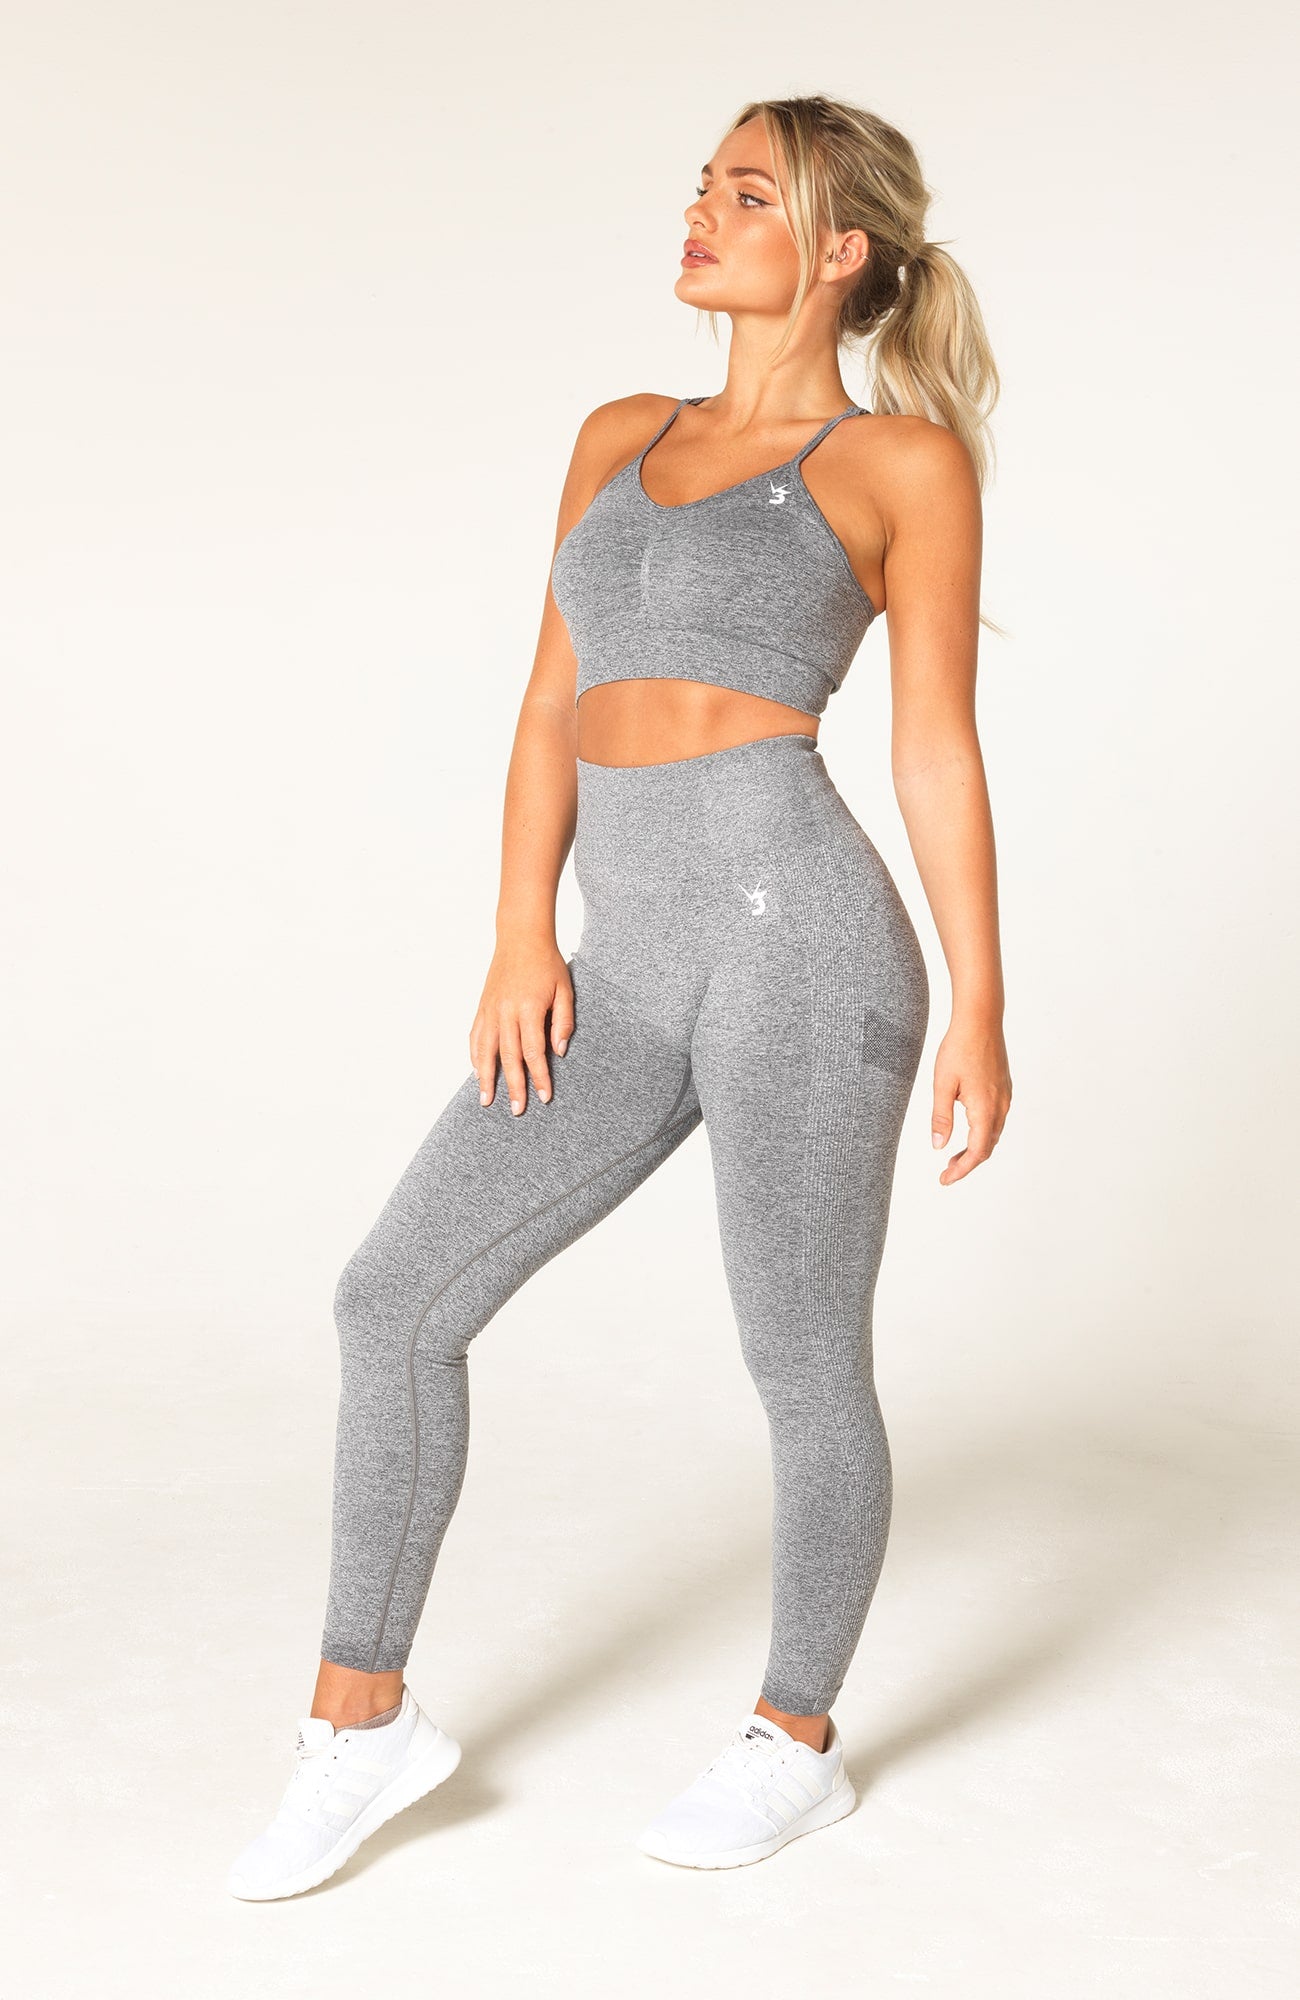 V3 Apparel Women's Define seamless scrunch bum shaping high waisted leggings in grey marl – Squat proof sports tights for Gym workouts training, Running, yoga, bodybuilding and bikini fitness.